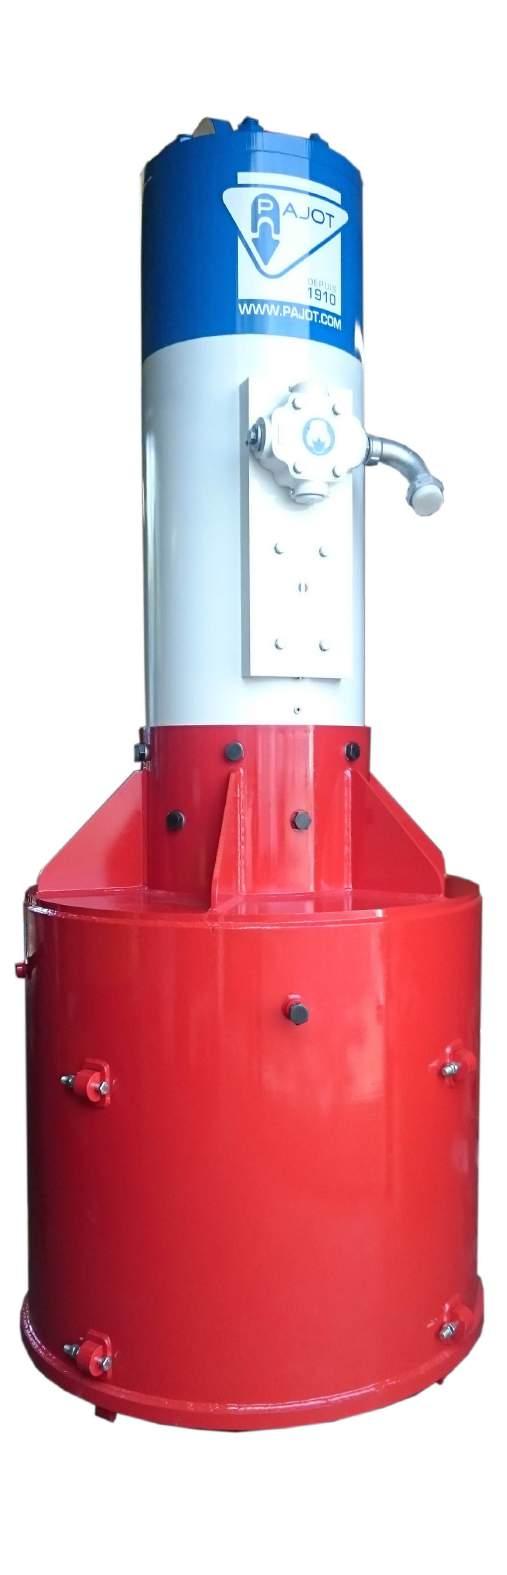 new cylindrique hammer PAJOT 5 200 C Specifications Approx. weight without guide (kg)... 5 150 Approx. weight with guide (kg)... approx. 8 000 Impact engergy at 8 bar (kg.m)...5 200 Blow rate (BPM).